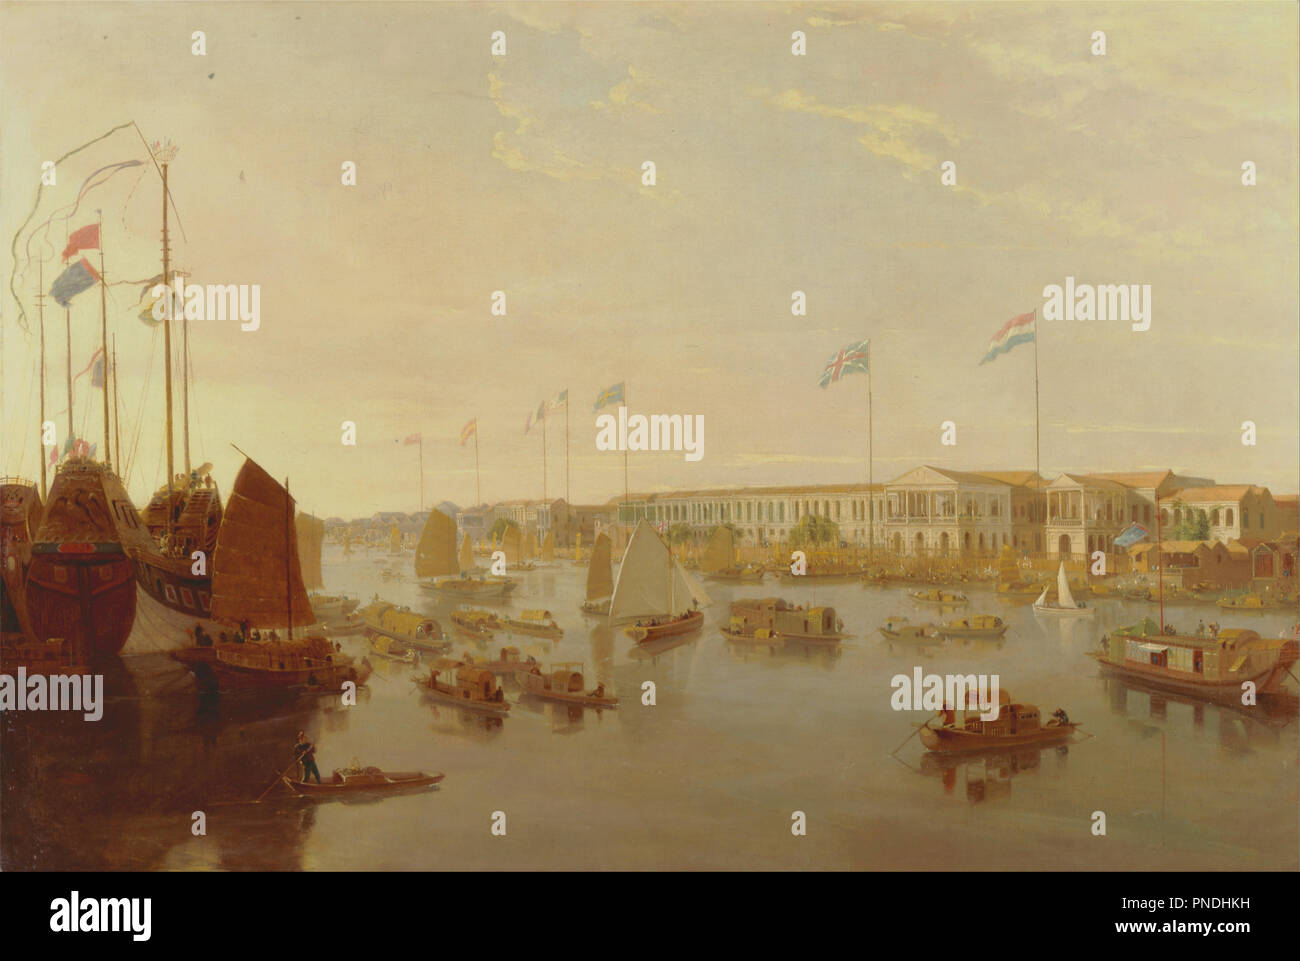 The European Factories, Canton. Date/Period: 1806. Painting. Oil on canvas. Height: 864 mm (34.01 in); Width: 1,270 mm (50 in). Author: William Daniell. Stock Photo